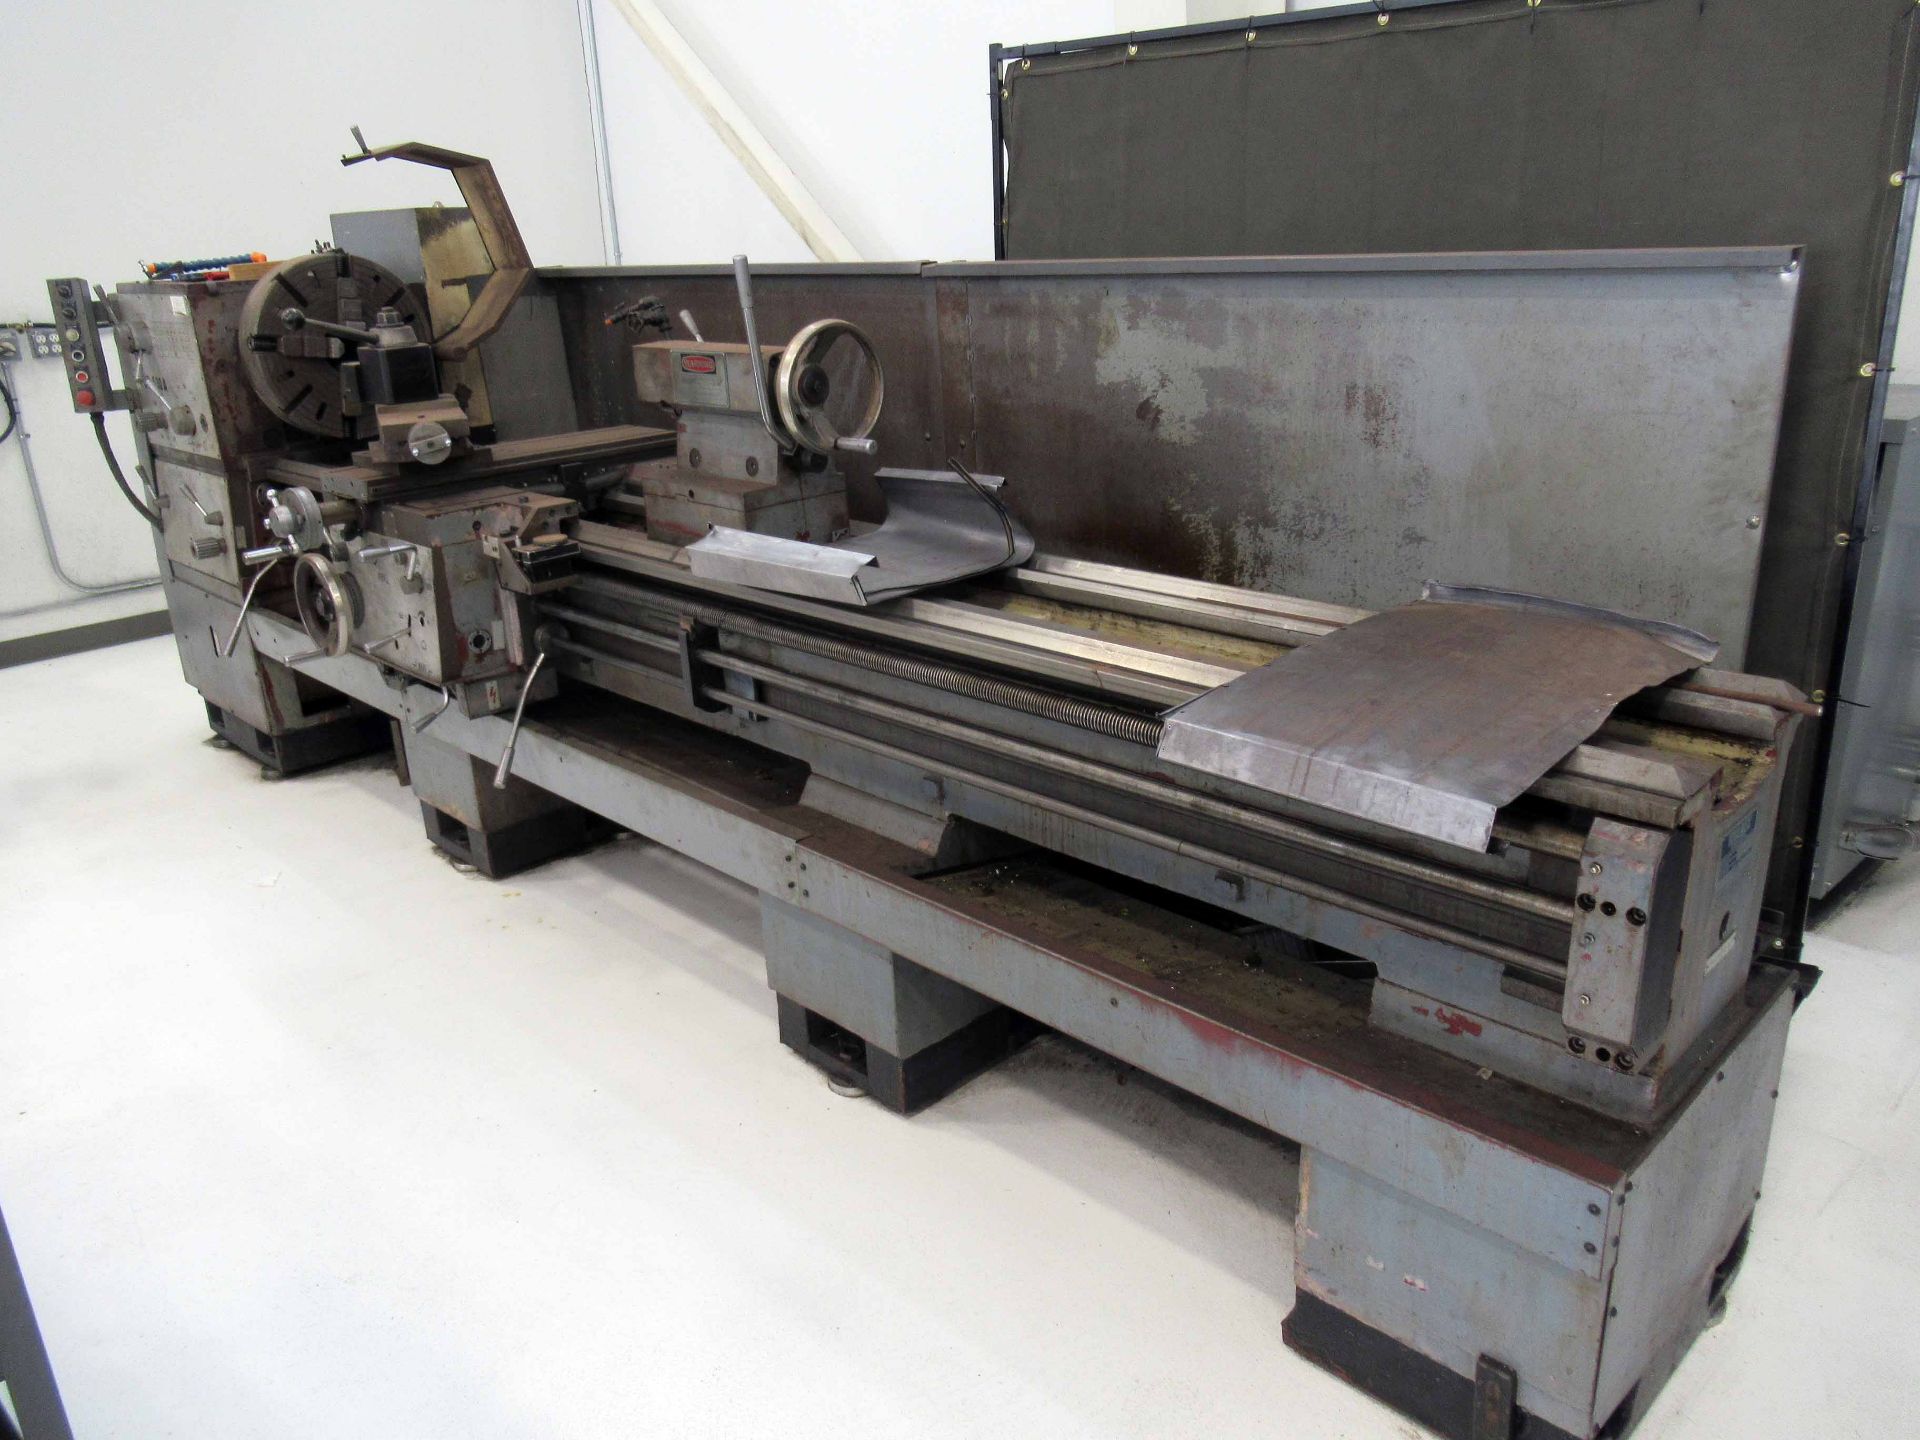 ENGINE LATHE, TOOLMEX MDL. TUR 630A, approx. 24" x 132" center to center, 18" 4-jaw chuck, tool